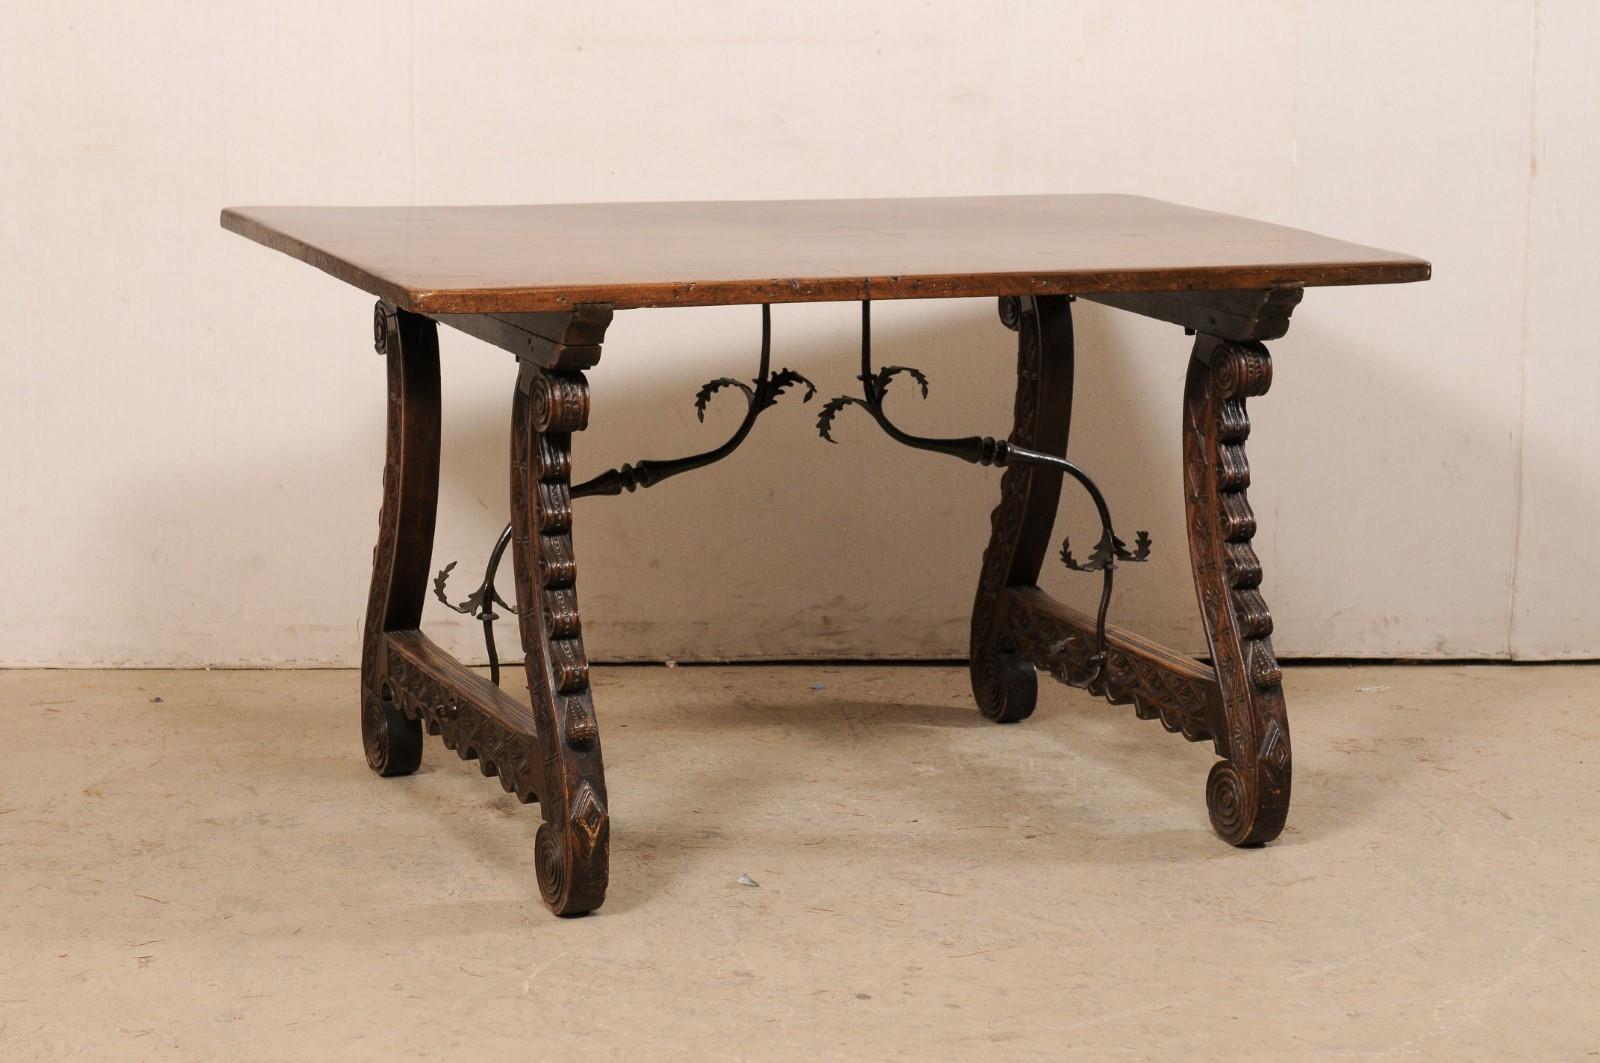 An Italian walnut wood nicely-carved trestle-leg table with decorative forged-iron stretcher, from the 18th century. This antique table from Italy features a rectangular-shaped top, which is raised upon a pair of lyre-shaped, trestle-styled legs,